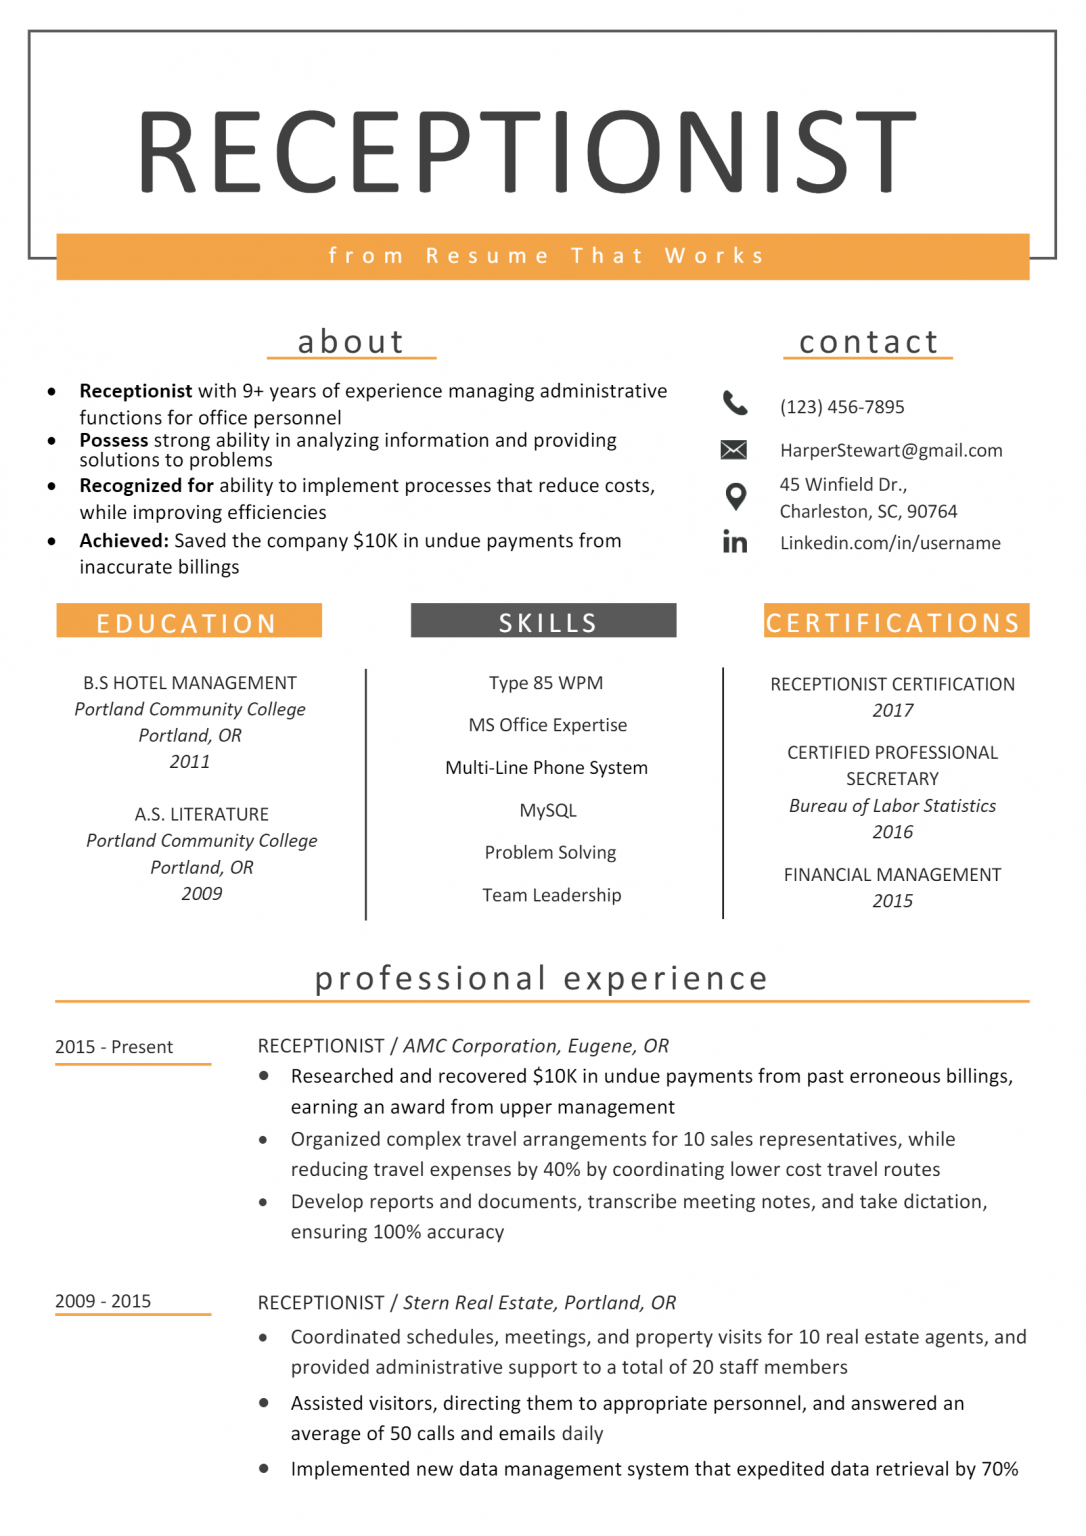 resume format for receptionist india